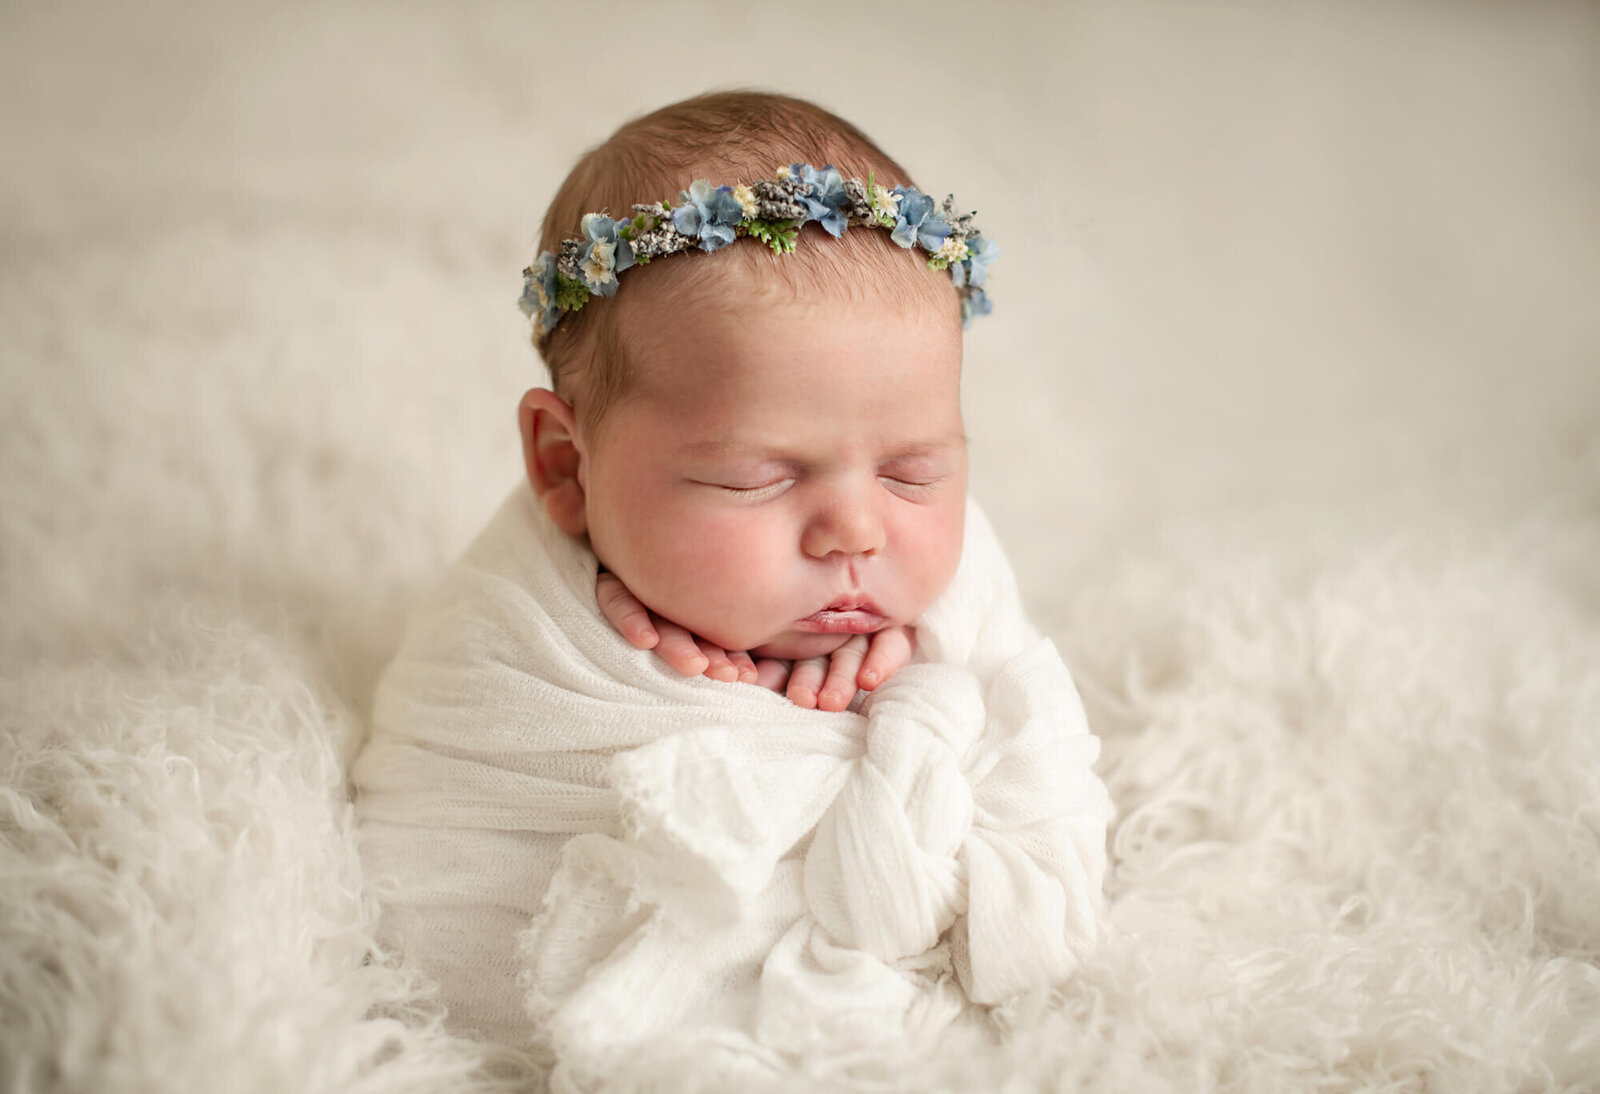 Sleeping newborn girl in  potato sack pose with white background and accessories